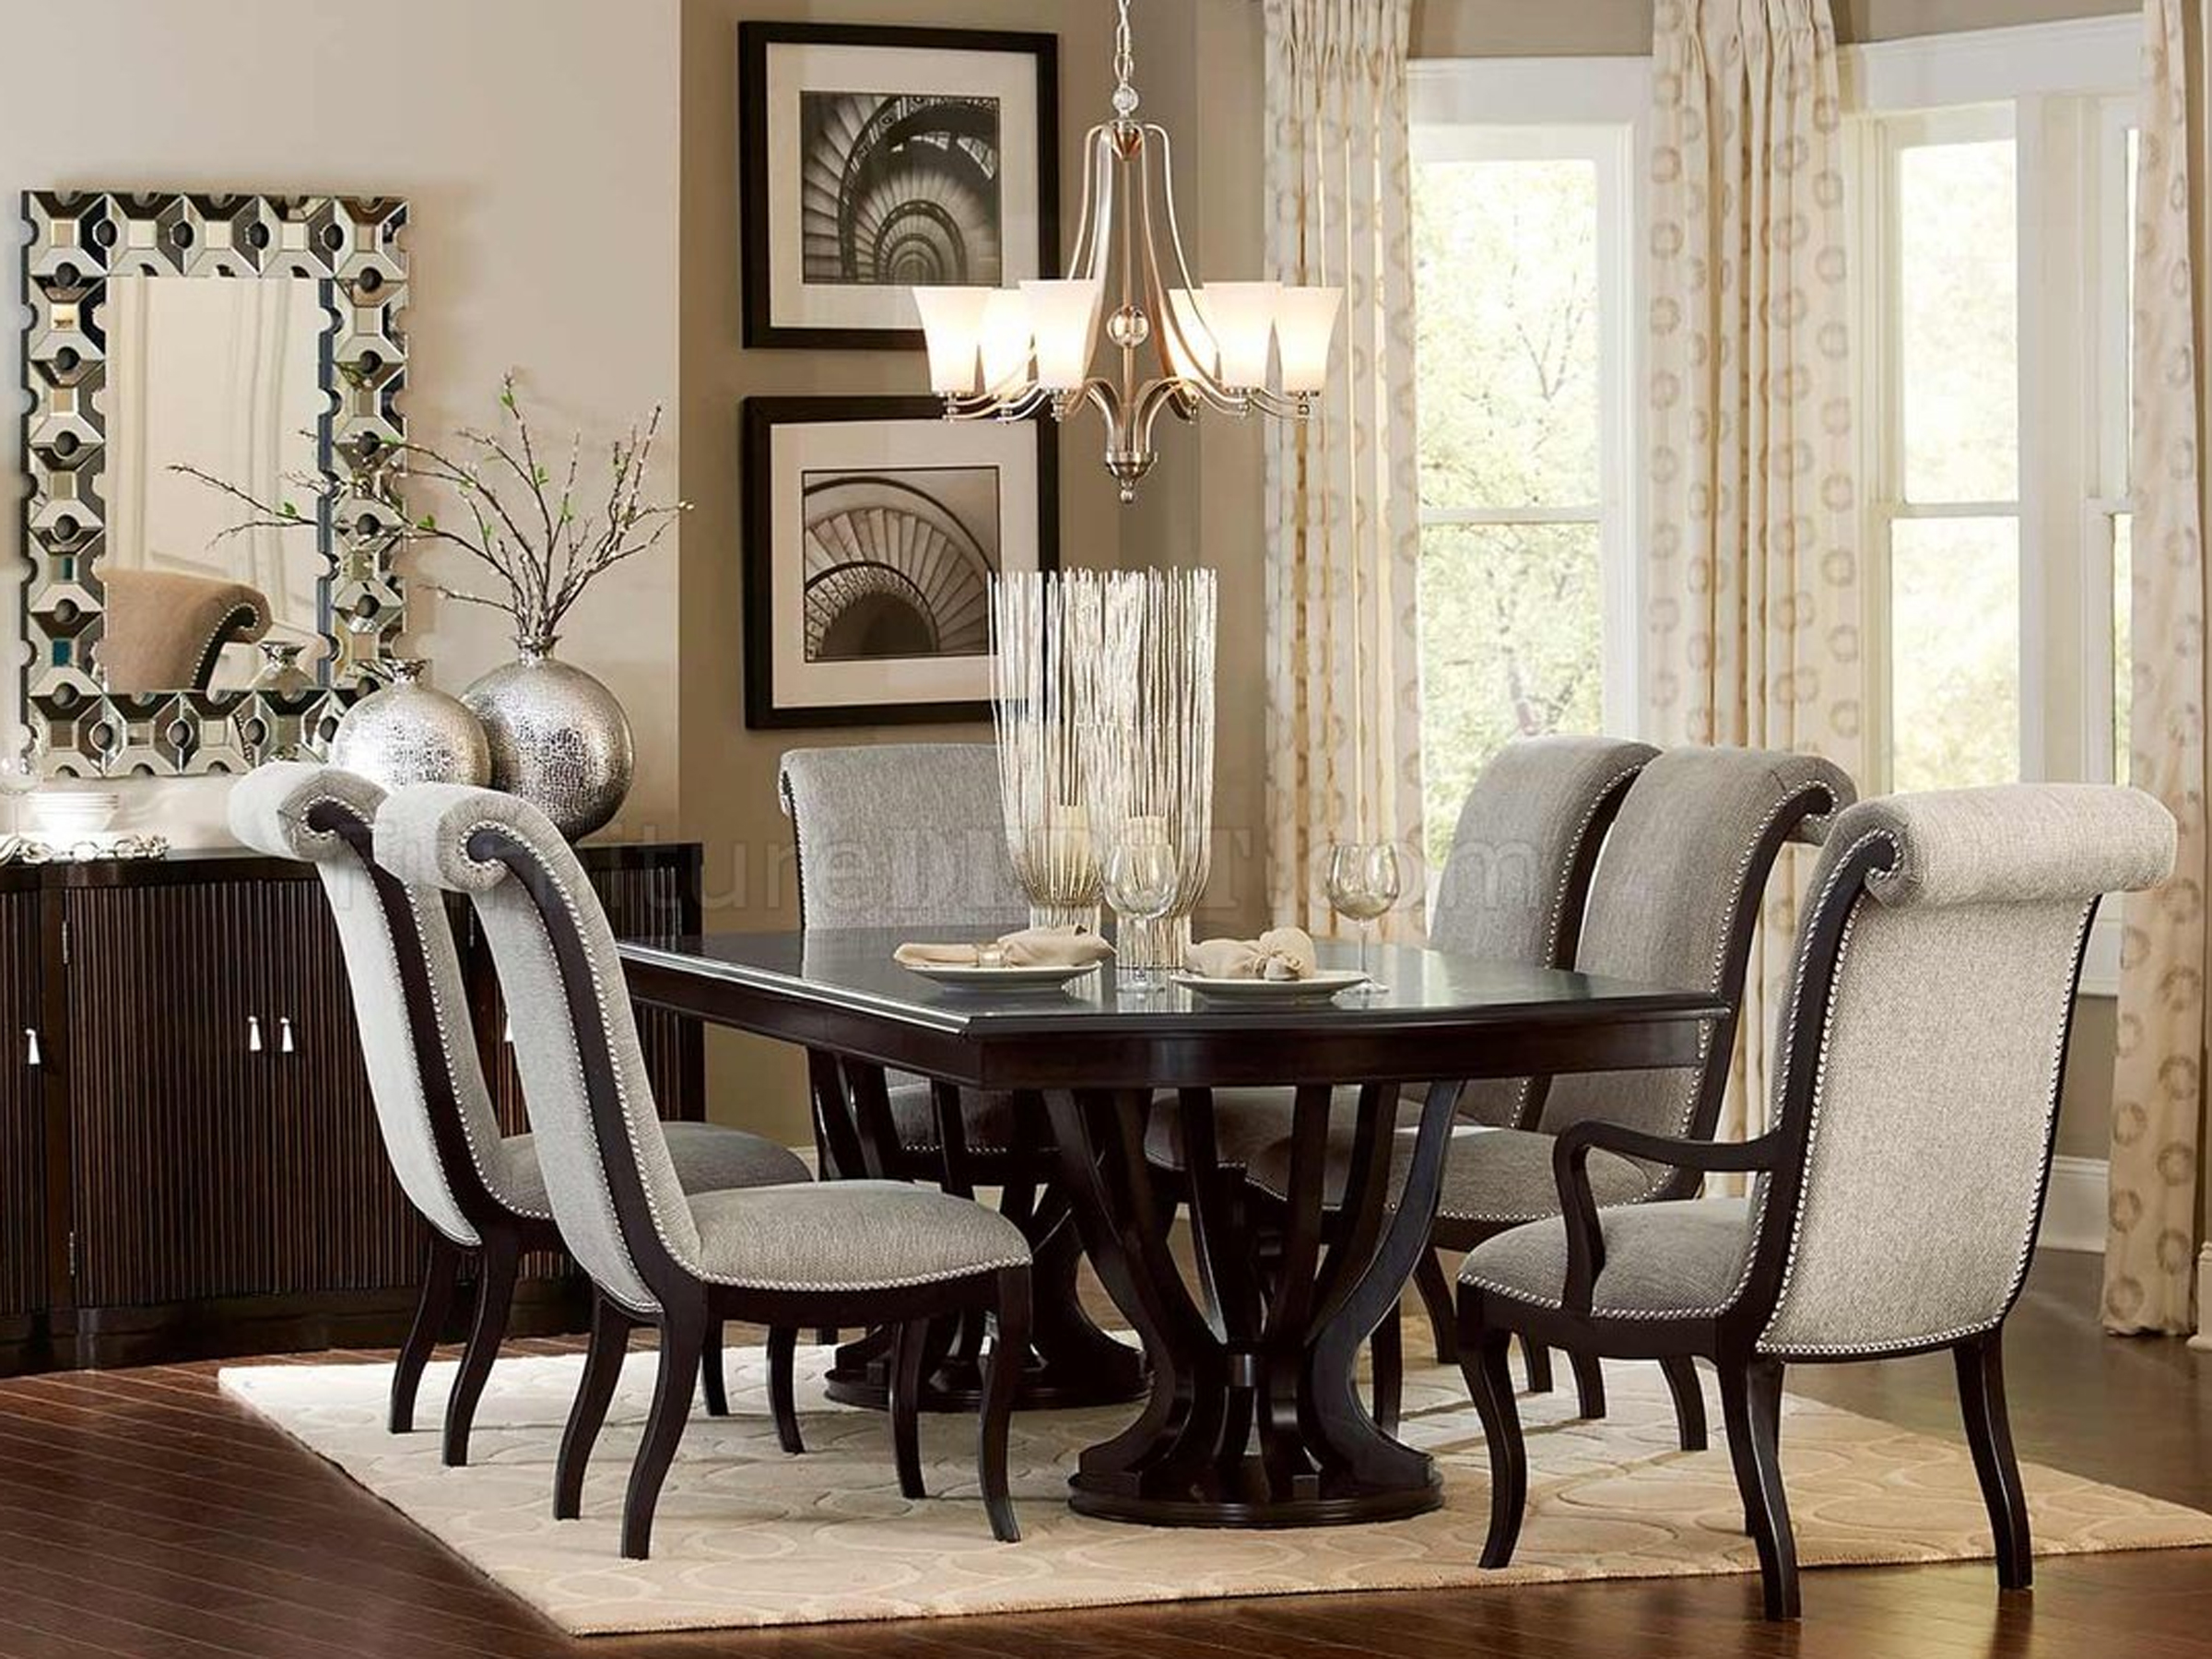 77he549477, Formal Dining Room Chairs With Arms